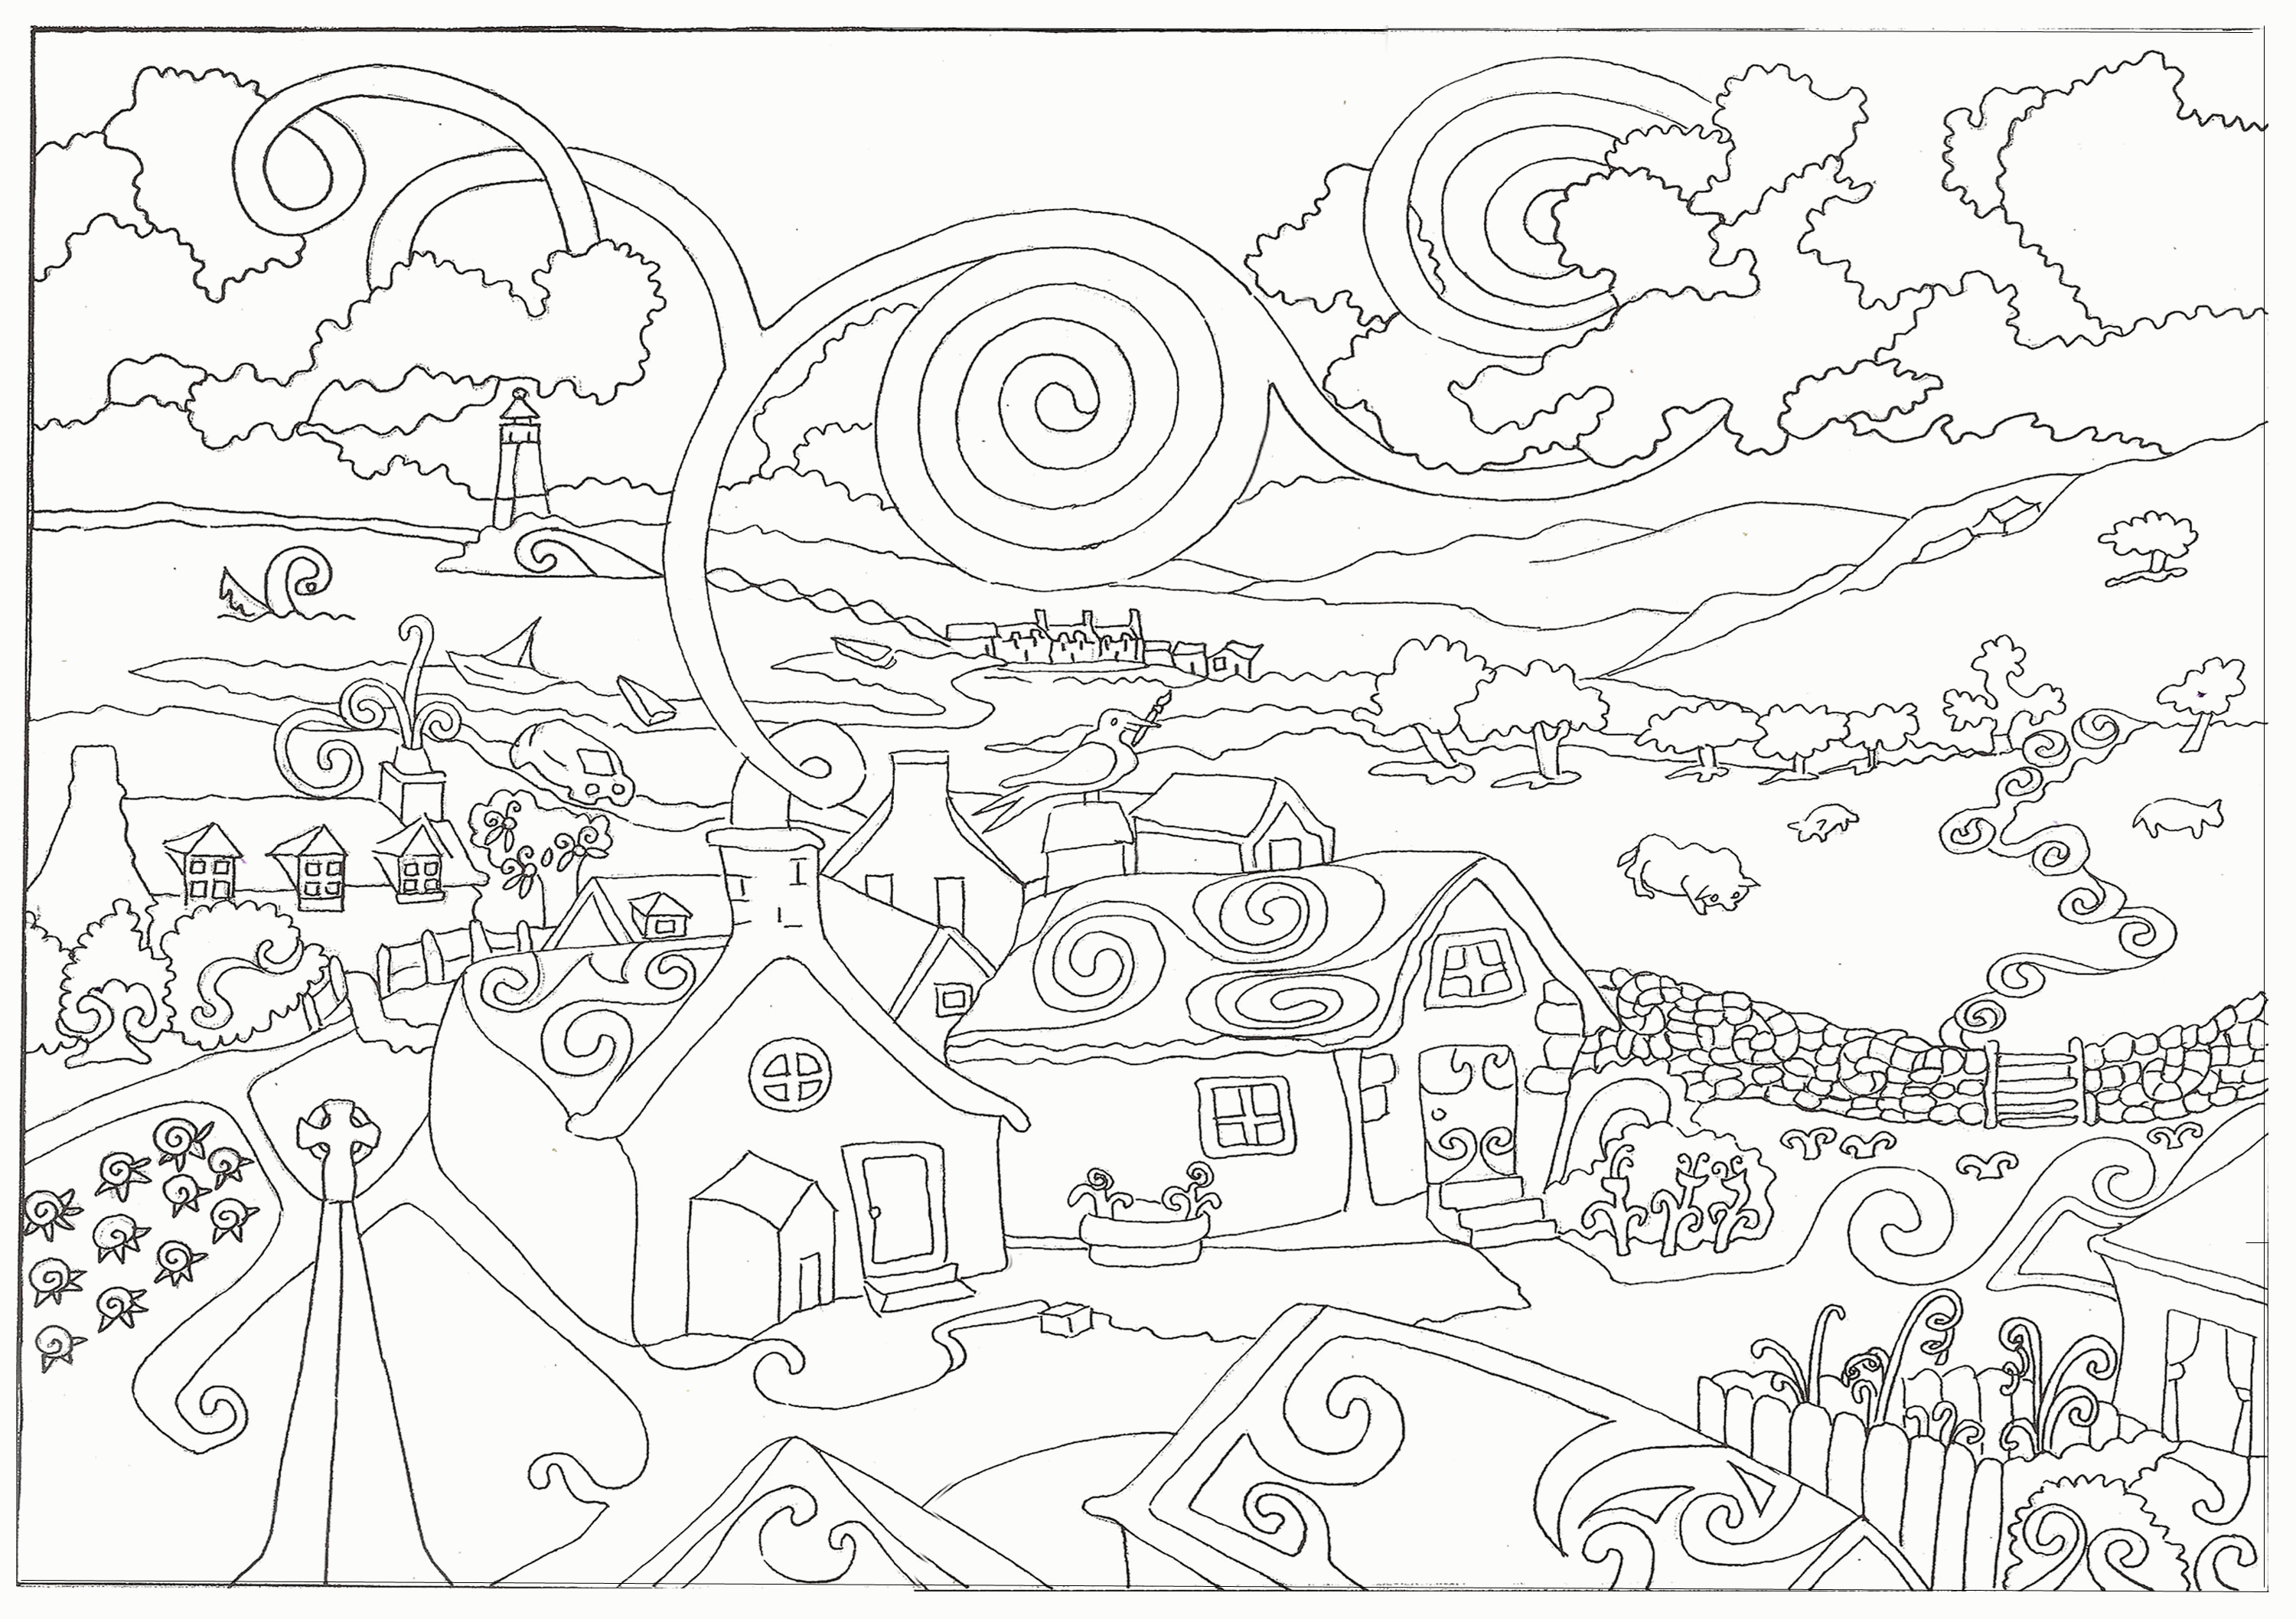 Coloring Pages For Kidsfor Older Kids 2